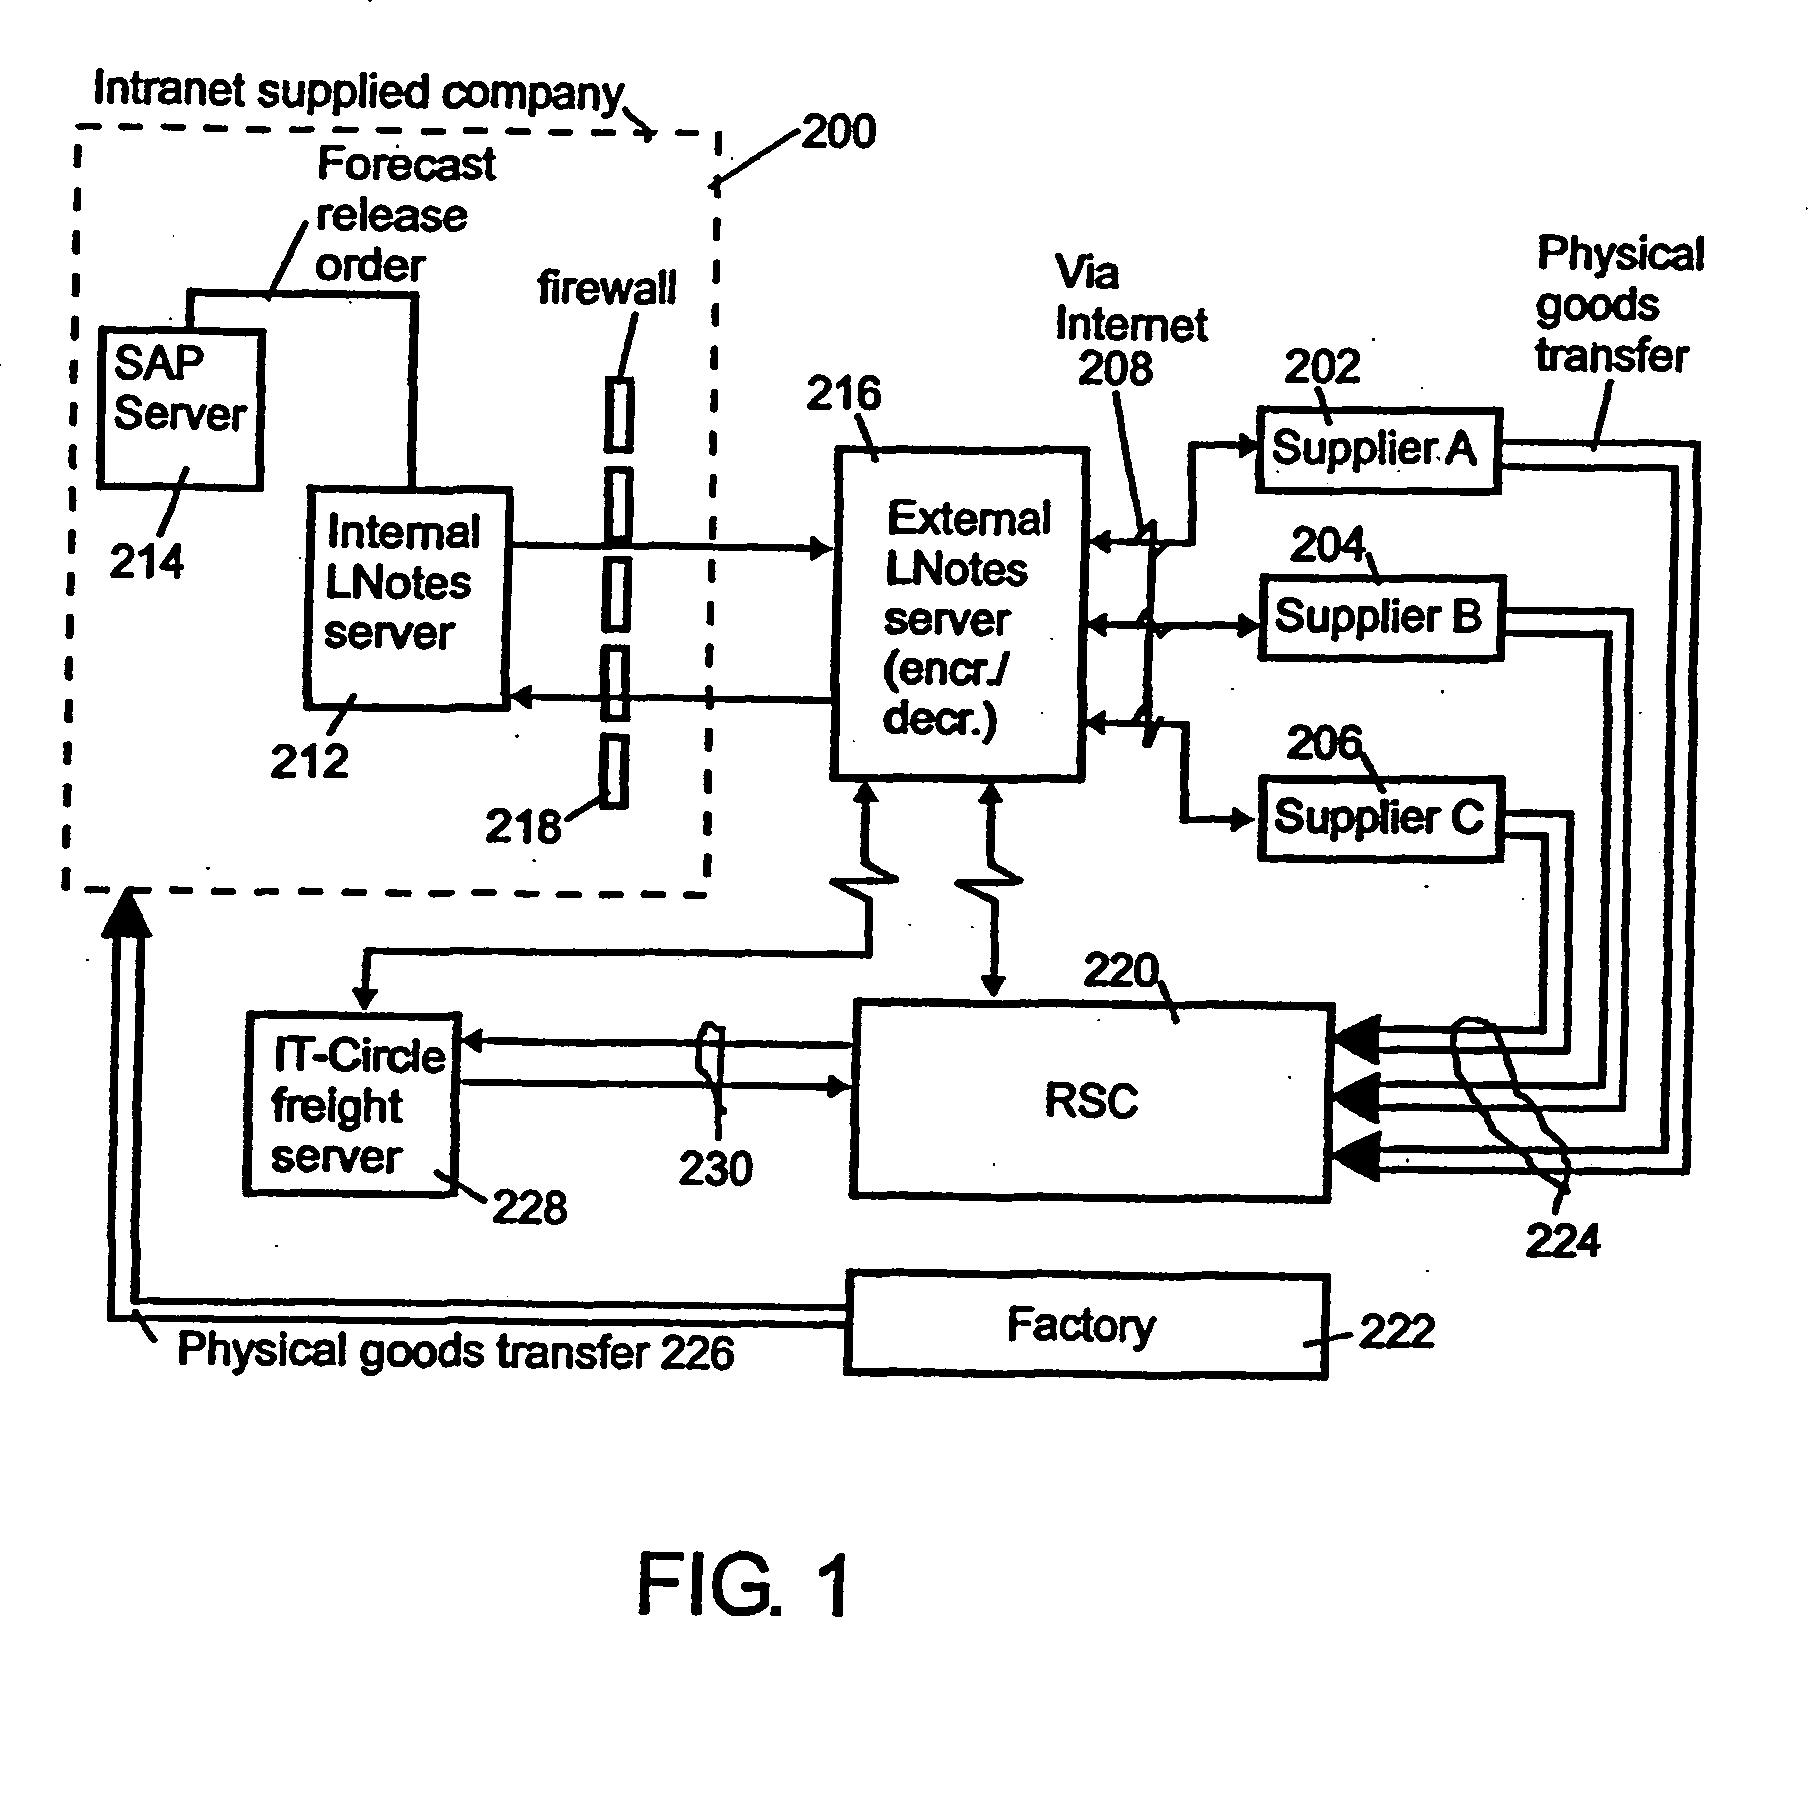 Method and system for computerizing quality management of a supply chain